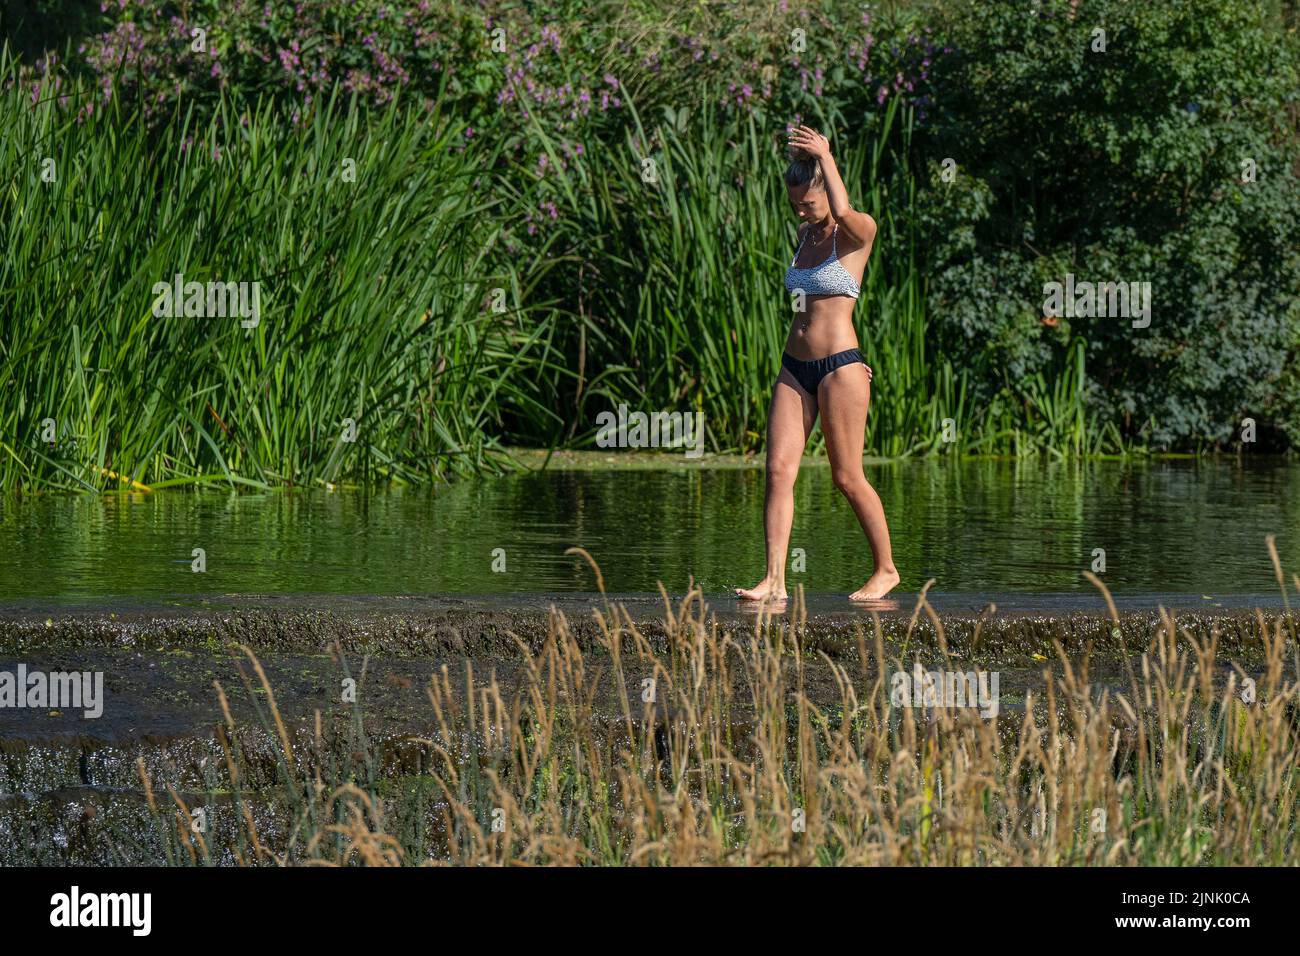 12.08.22. WEATHER SOMERSET.  People enjoy the water at Warleigh Weir on the River Avon near Bath in Somerset as temperatures continue to soar across t Stock Photo